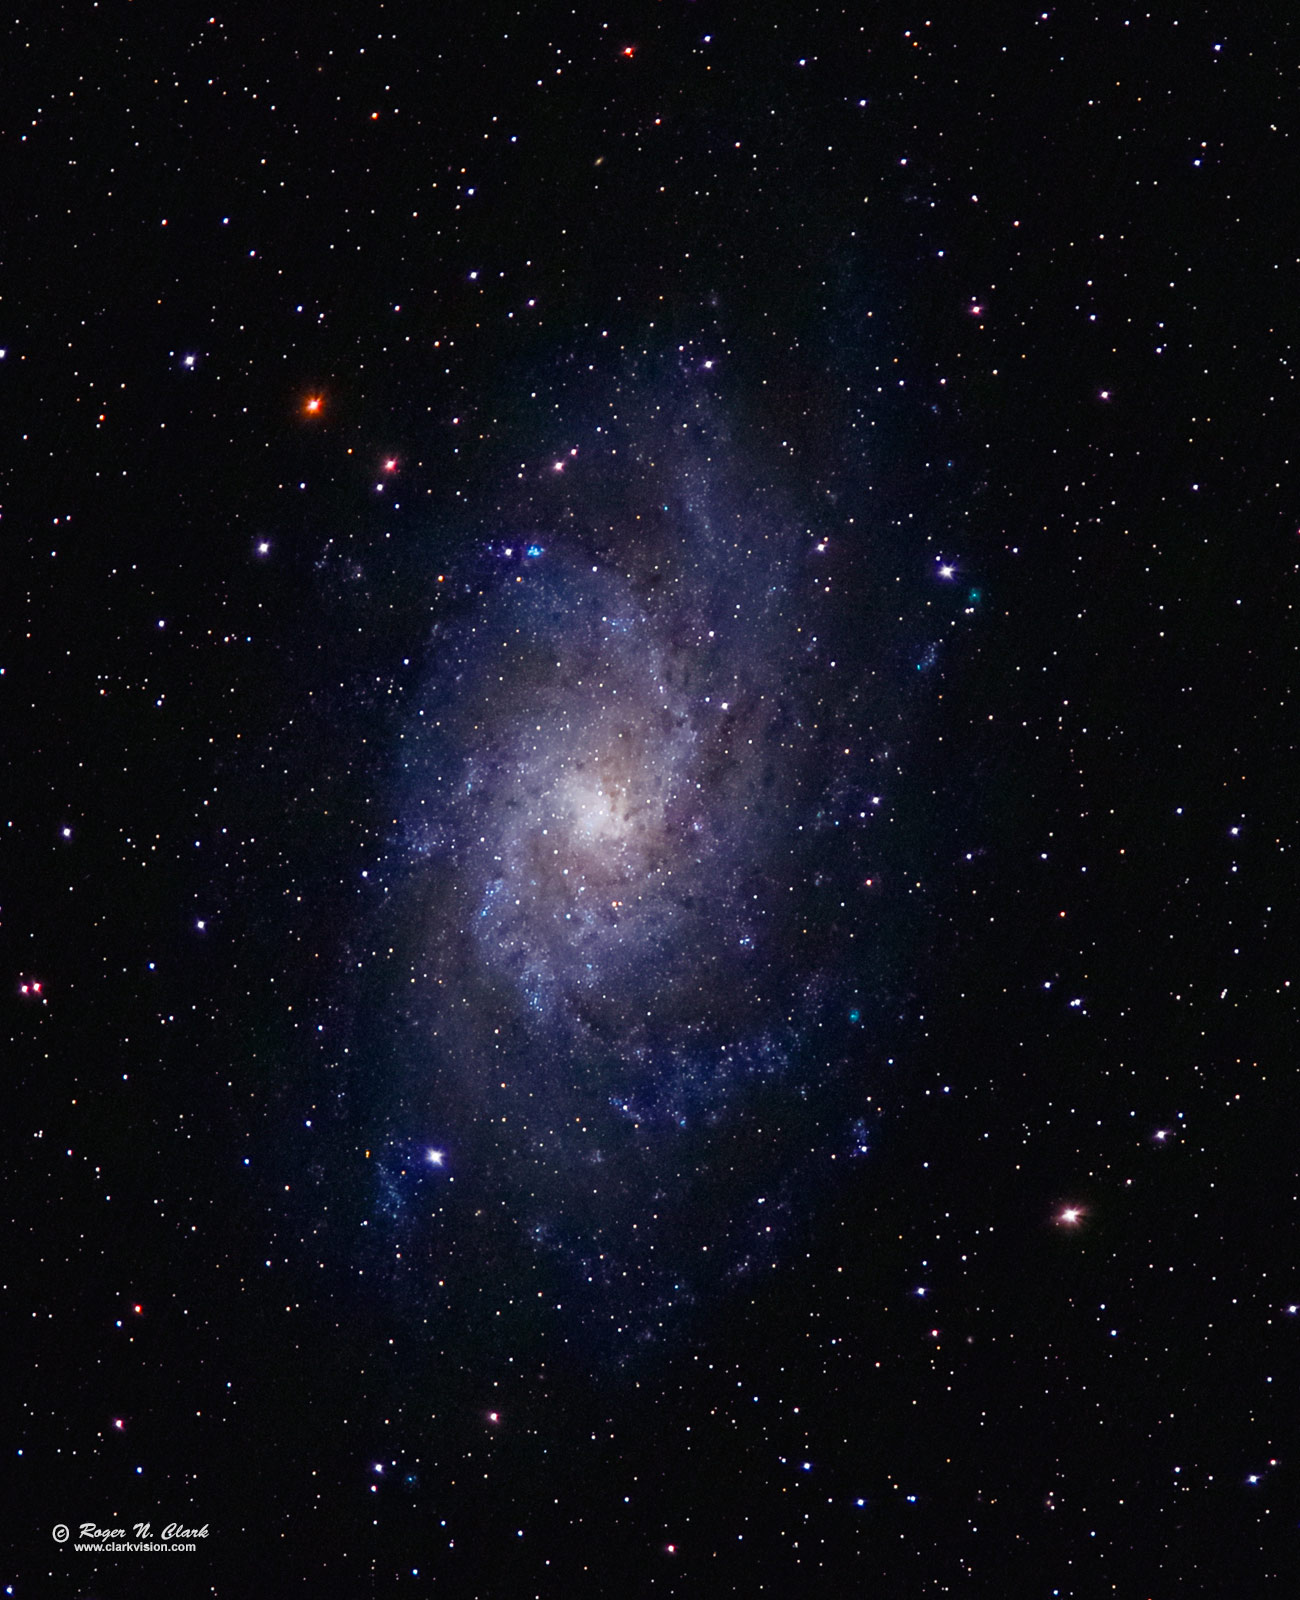 image m33.c08.13.2015.0J6A5389-445-46frames-sigav2c1-rs50-f-r90-.8x-1600vs.jpg is Copyrighted by Roger N. Clark, www.clarkvision.com